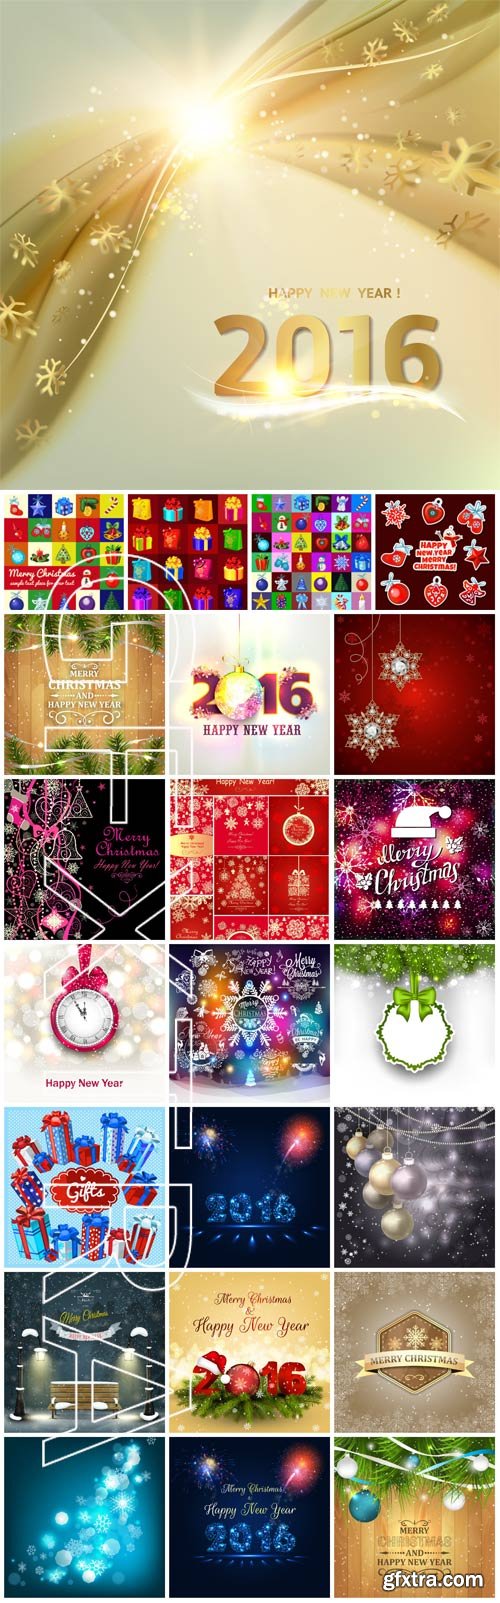 2016 Merry Christmas, New Year, holiday, backgrounds vector